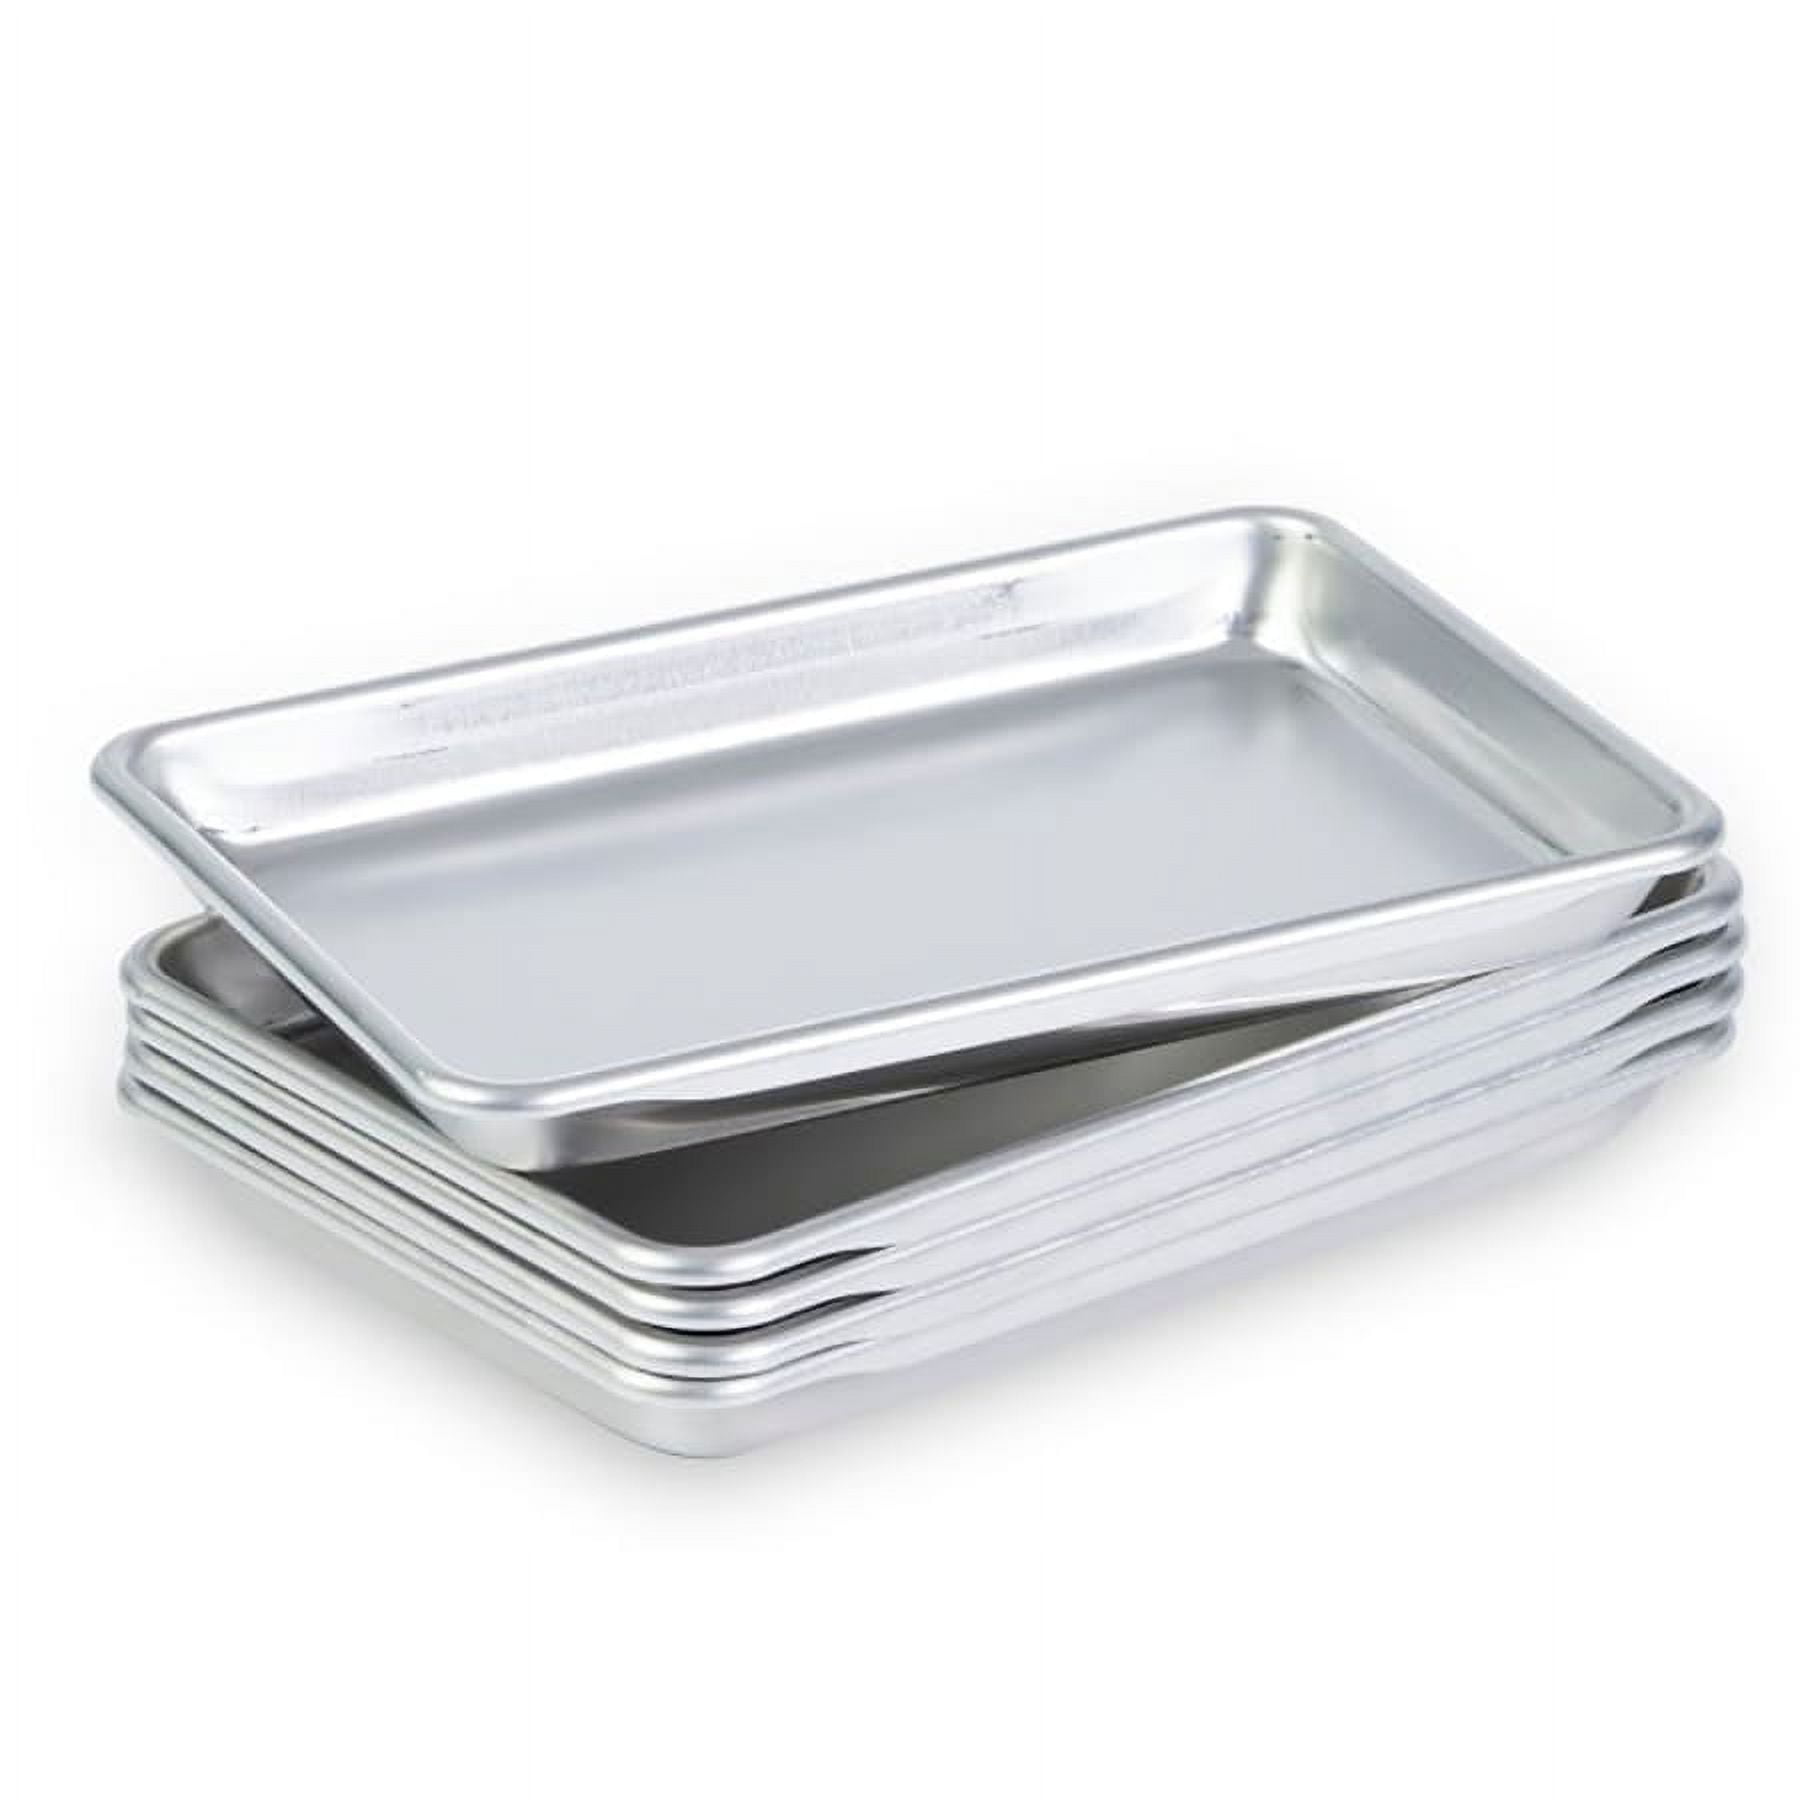 Wear-Ever Vollrath Natural Finish Aluminum Cookie Sheet, 17 x 14